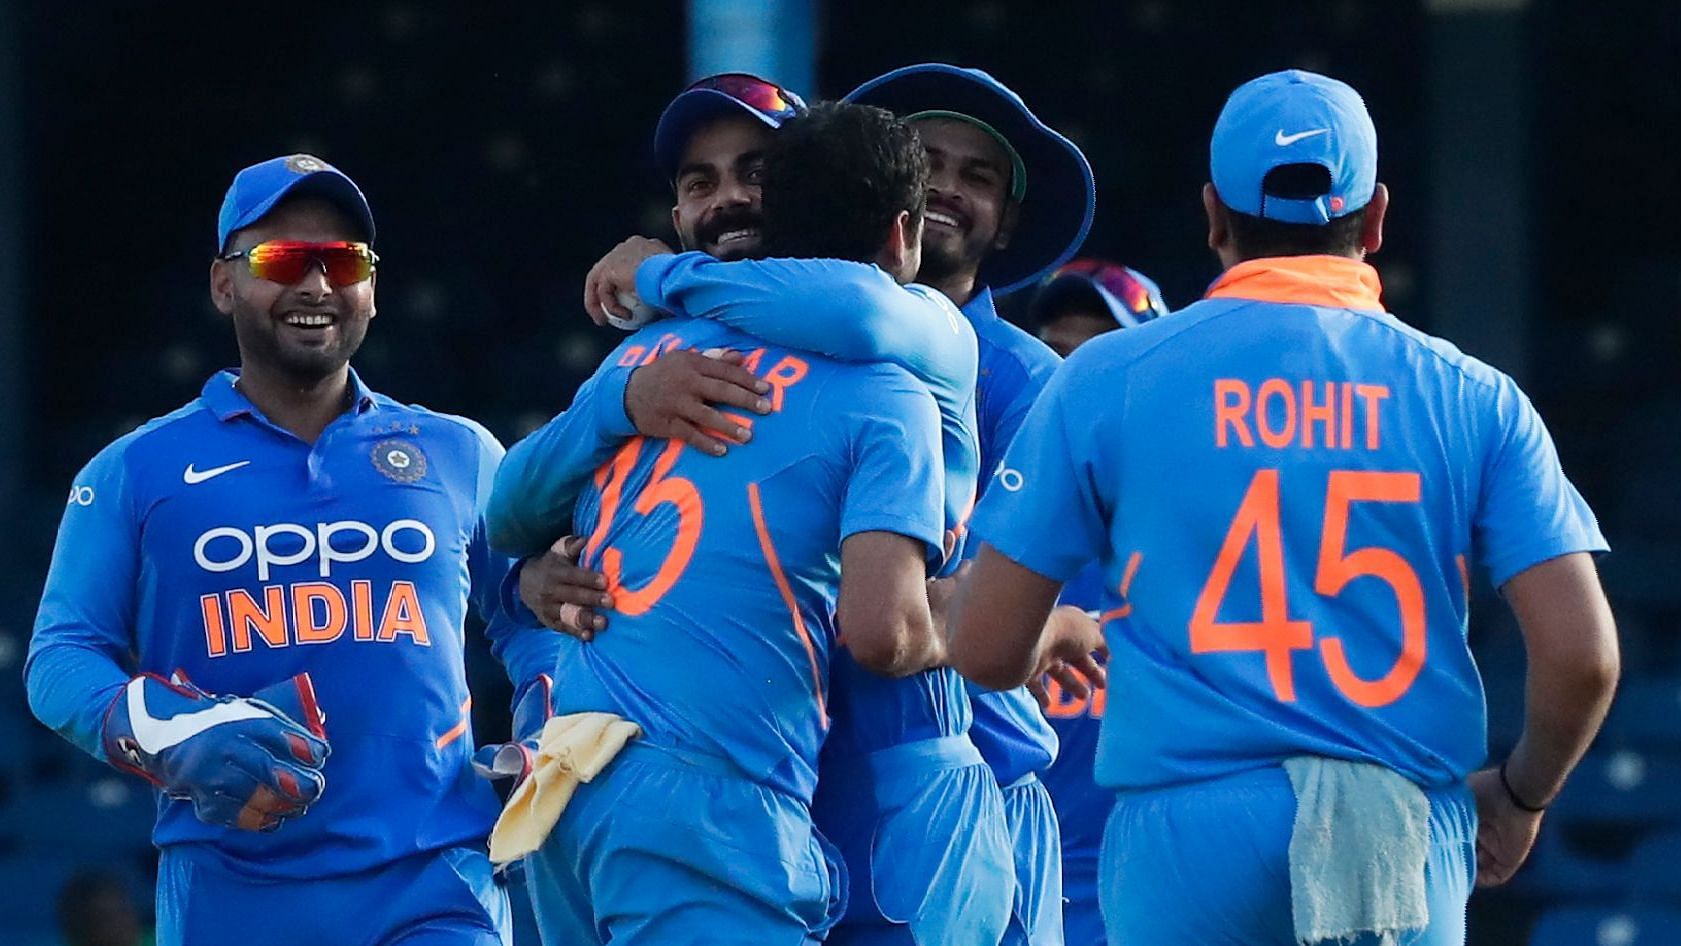 India beat West Indies by 59 runs in the second ODI at Port of Spain.